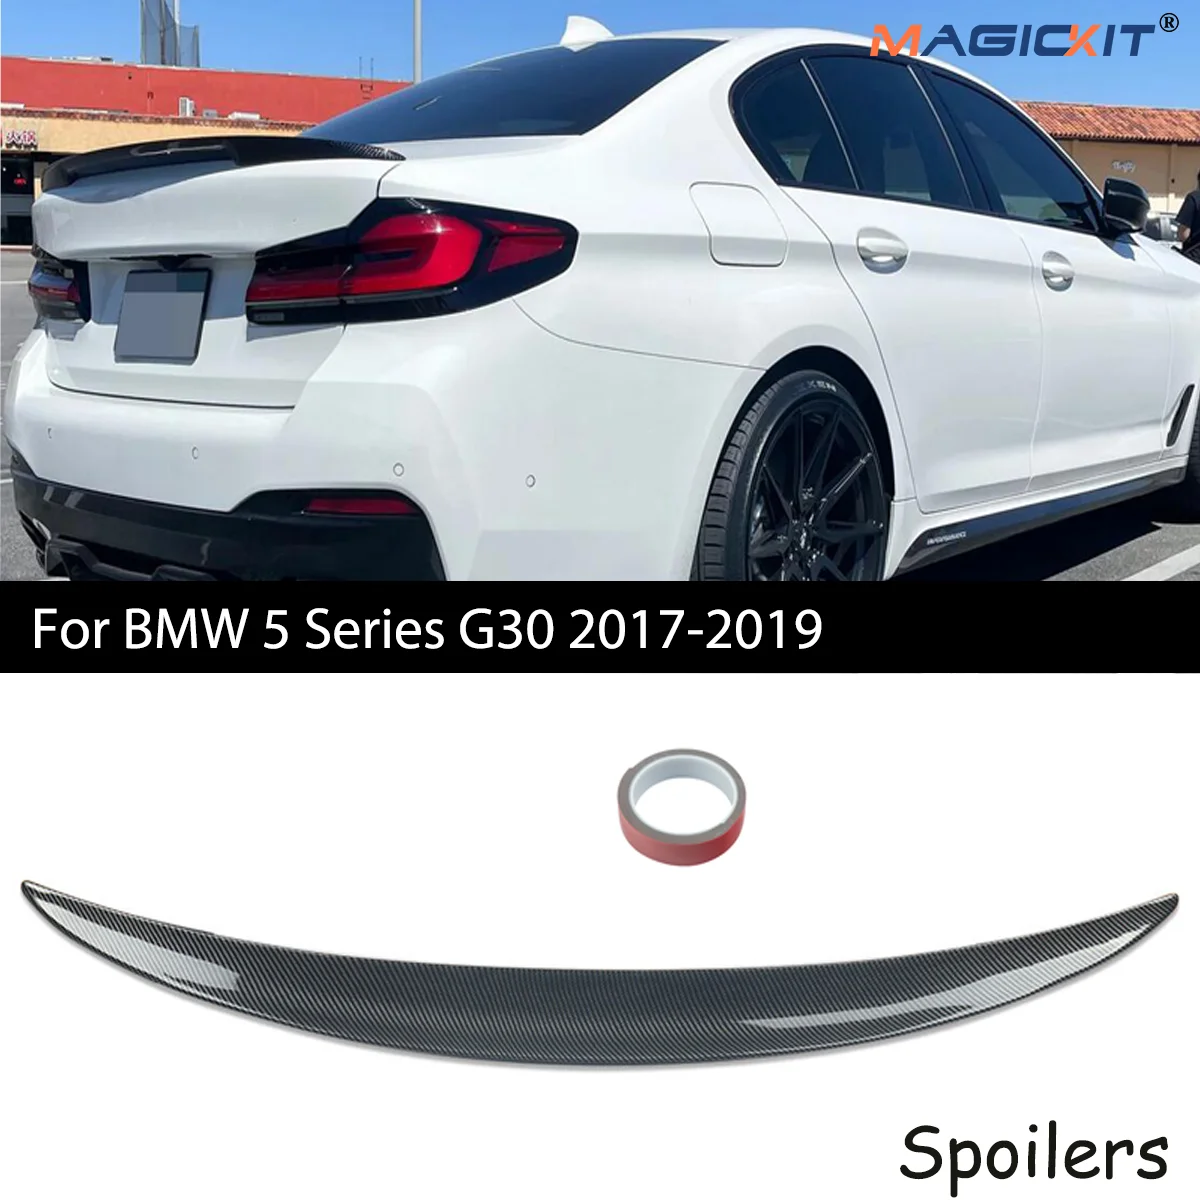 

MagicKit Rear Roof Spoiler For BMW 5 Series G30 M Sport 2017-2019 Model Carbon Fiber Look Back Trunk Wing Car Body Accessories